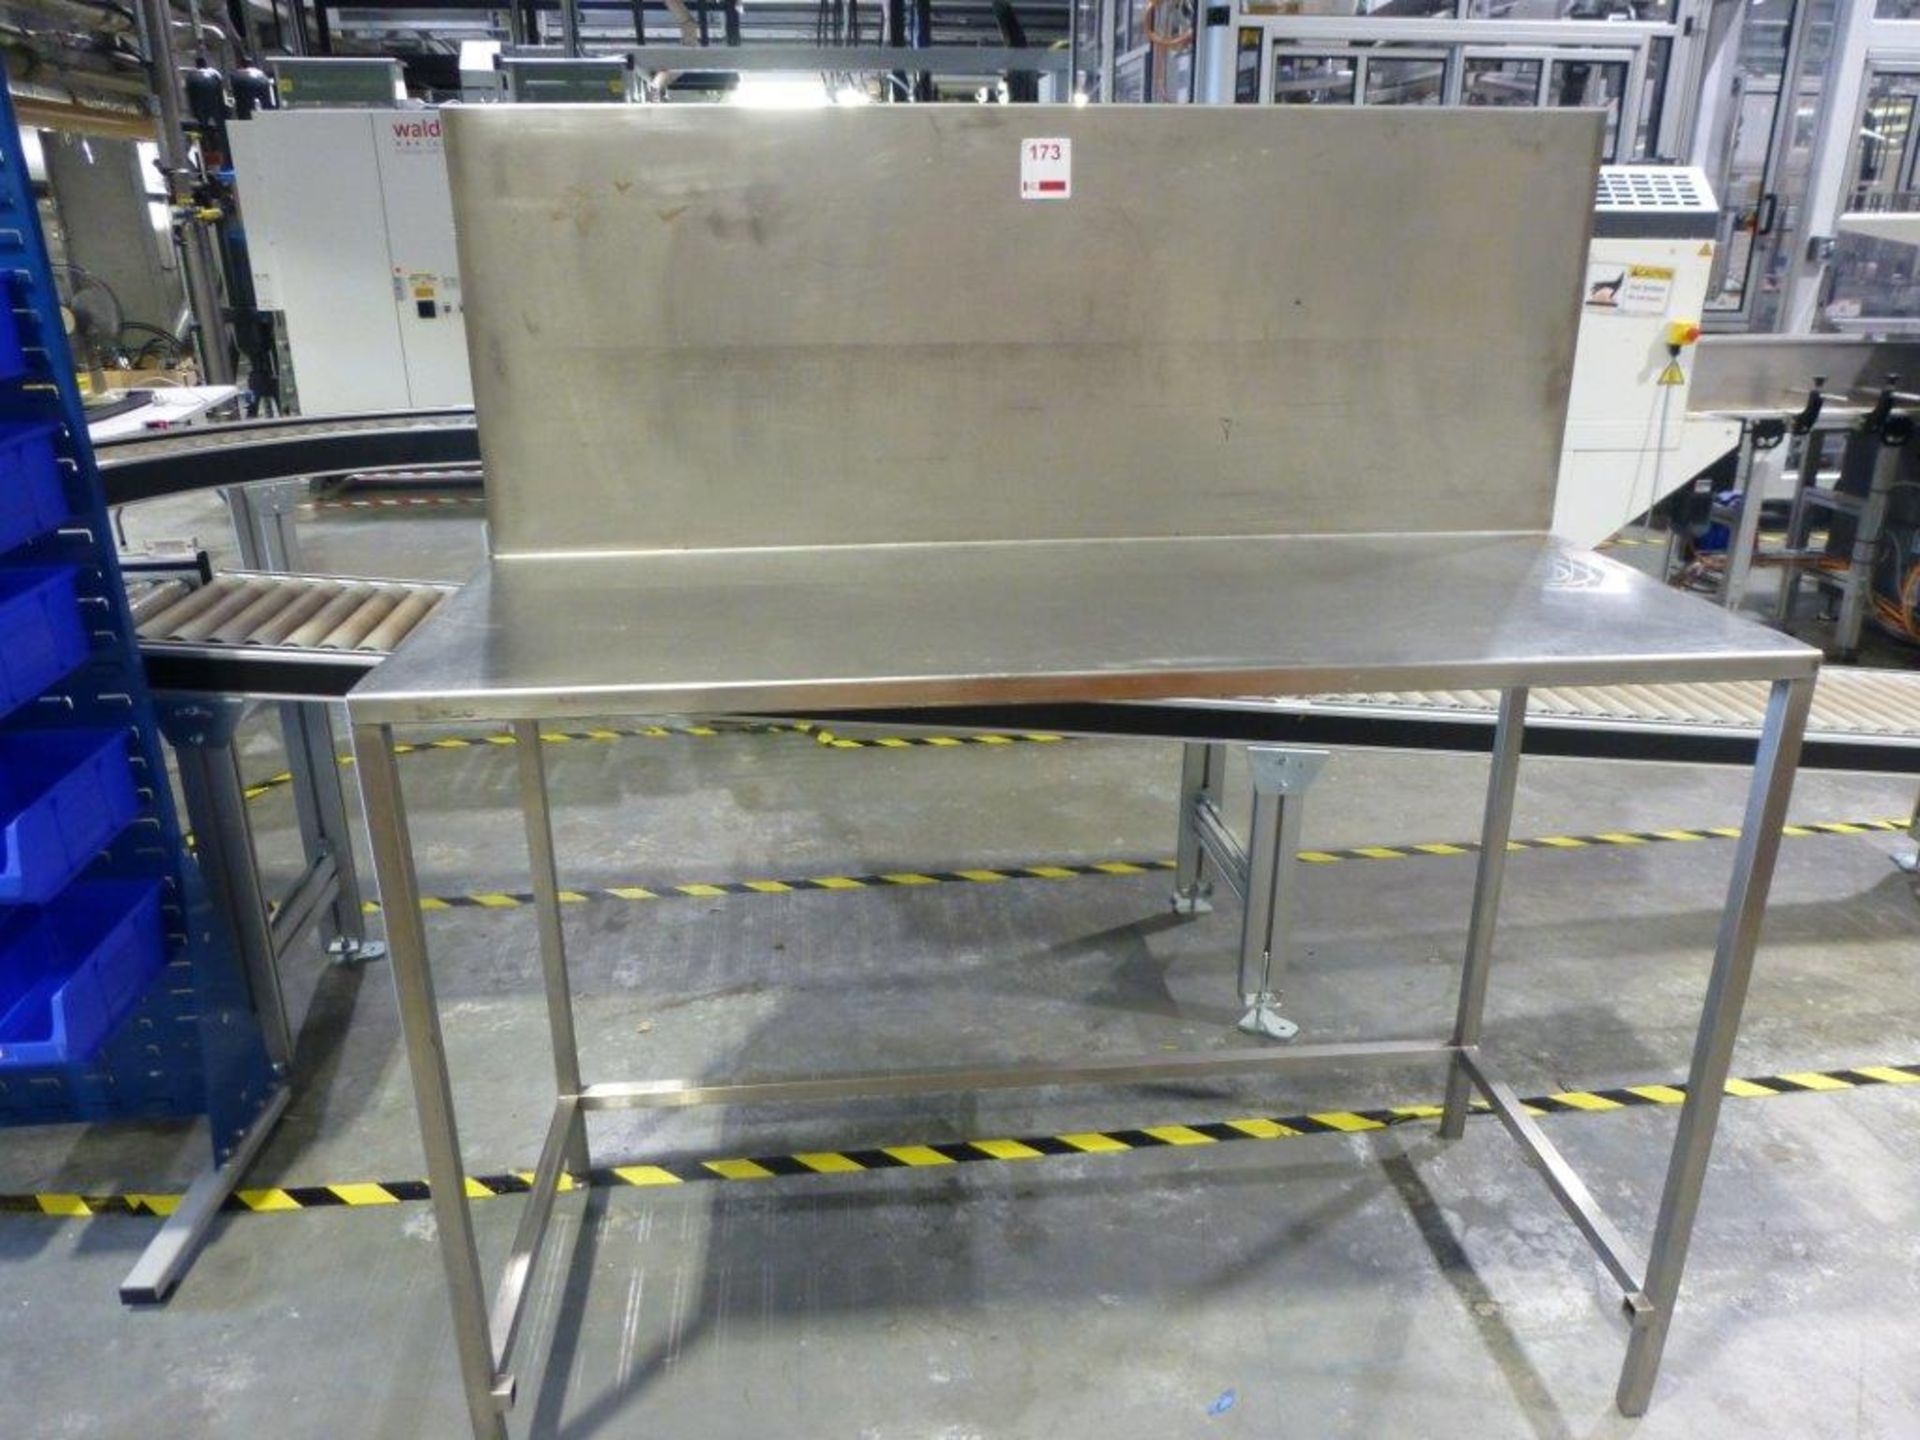 1500mm x 600mm x 1060mm stainless steel table with splashback panel